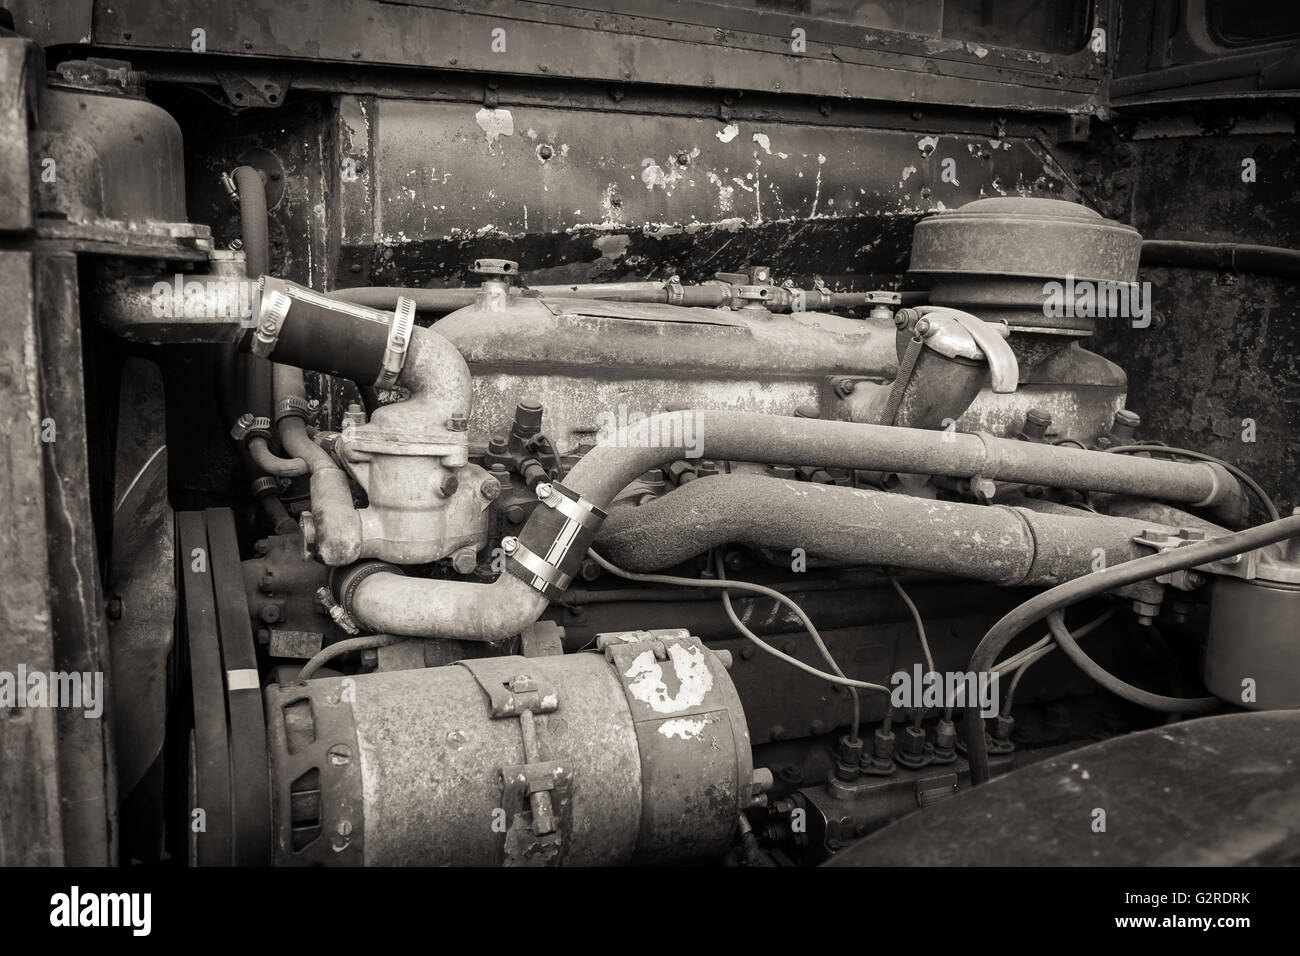 A rusty and dirty old bus engine. Stock Photo